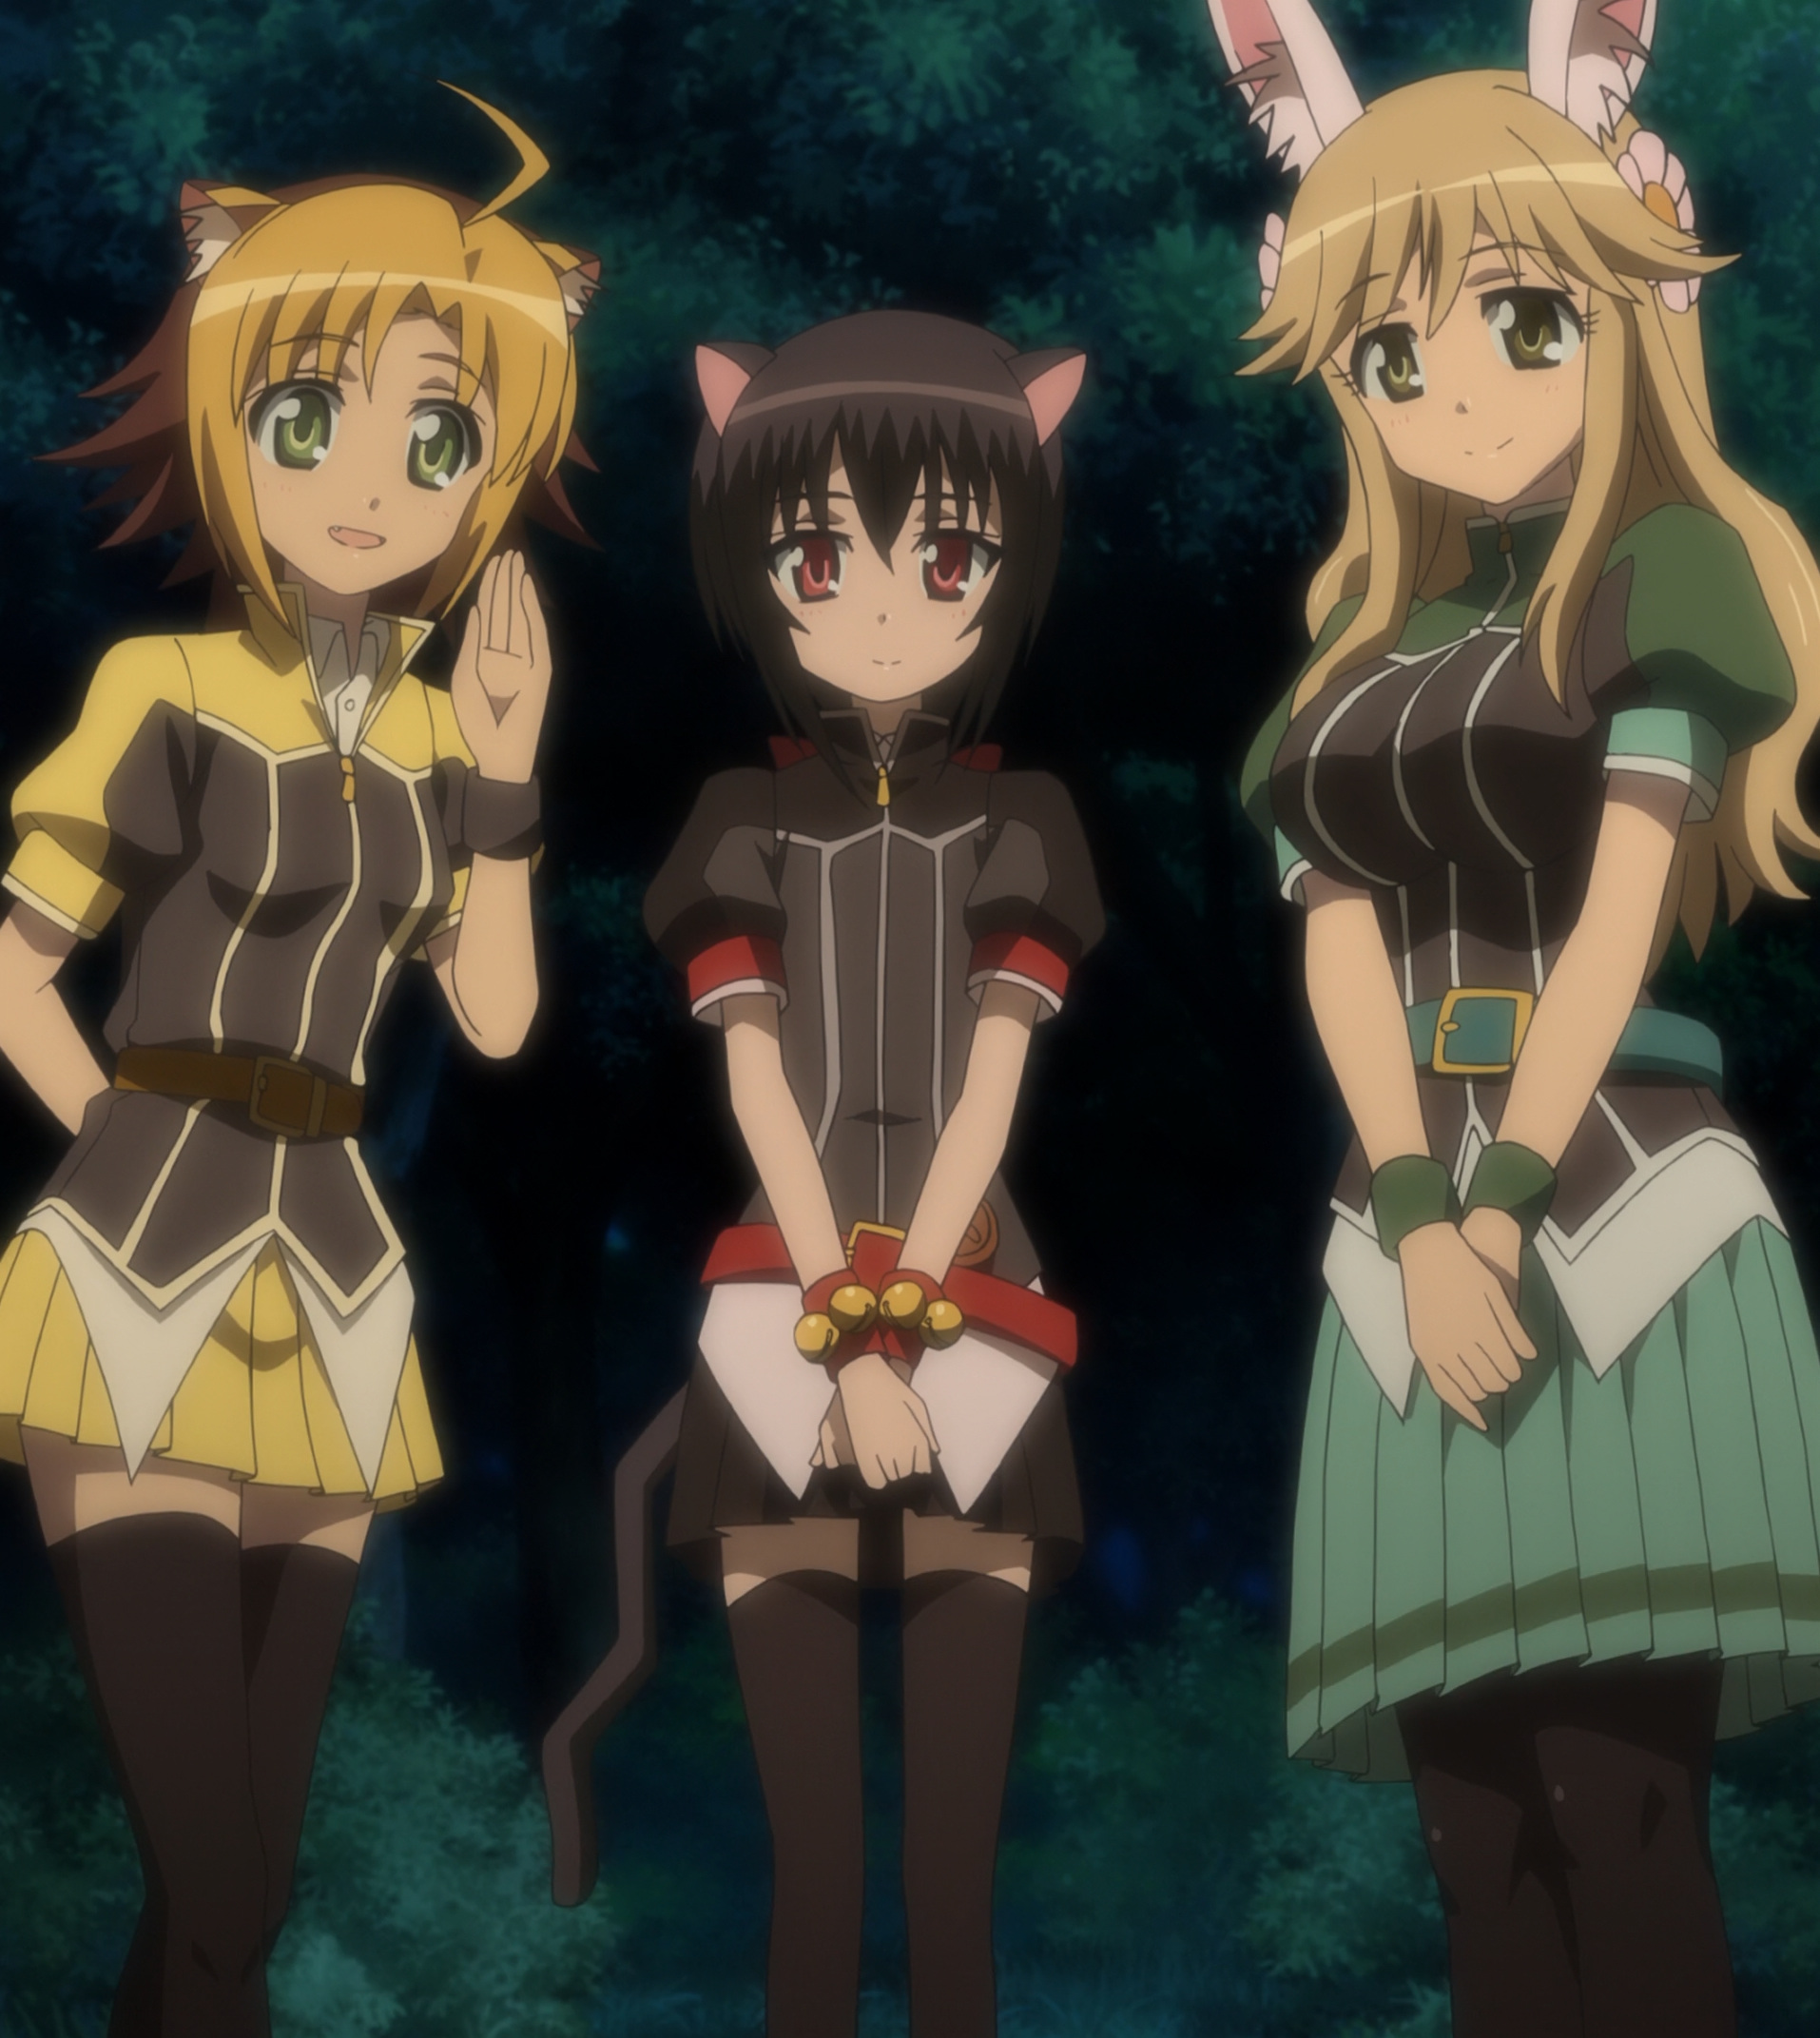 Dog Days Blu-ray Media Review Episode 11